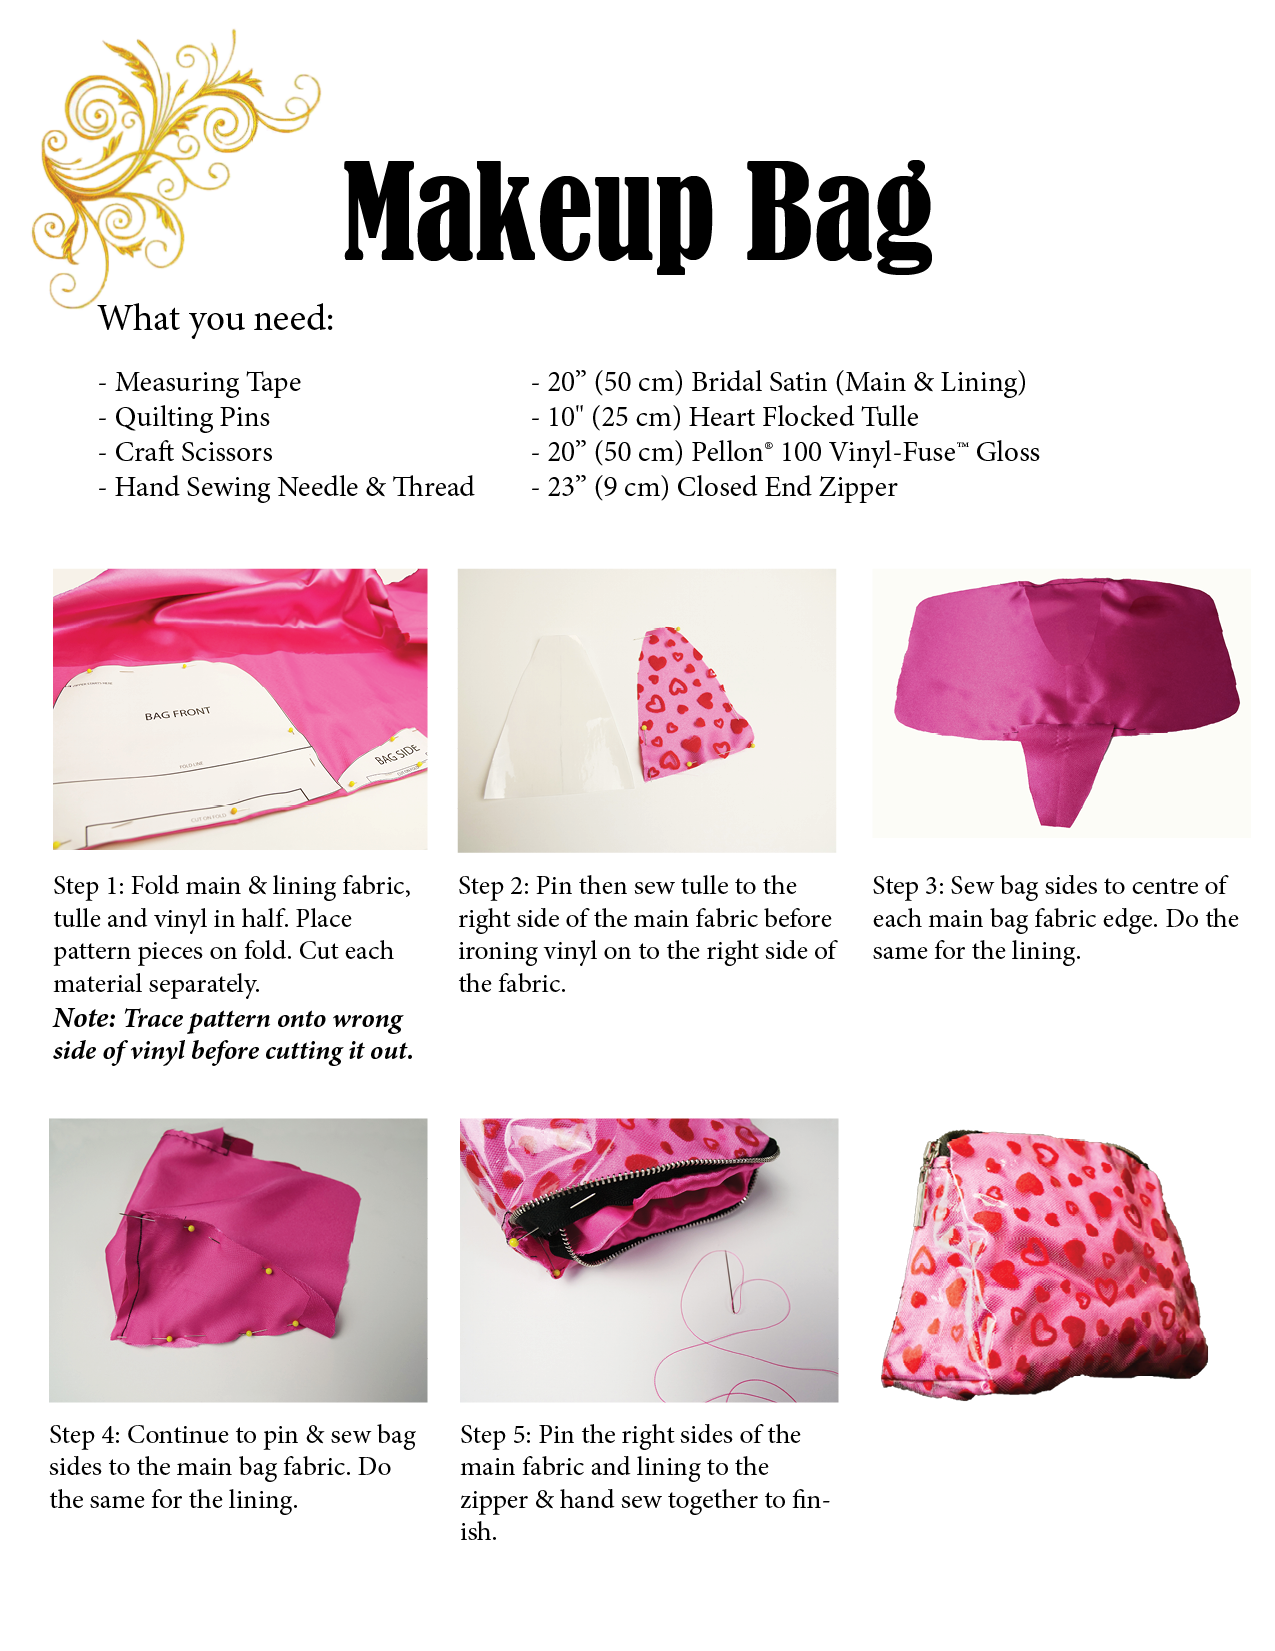 Instructional steps to creating your own makeup bag